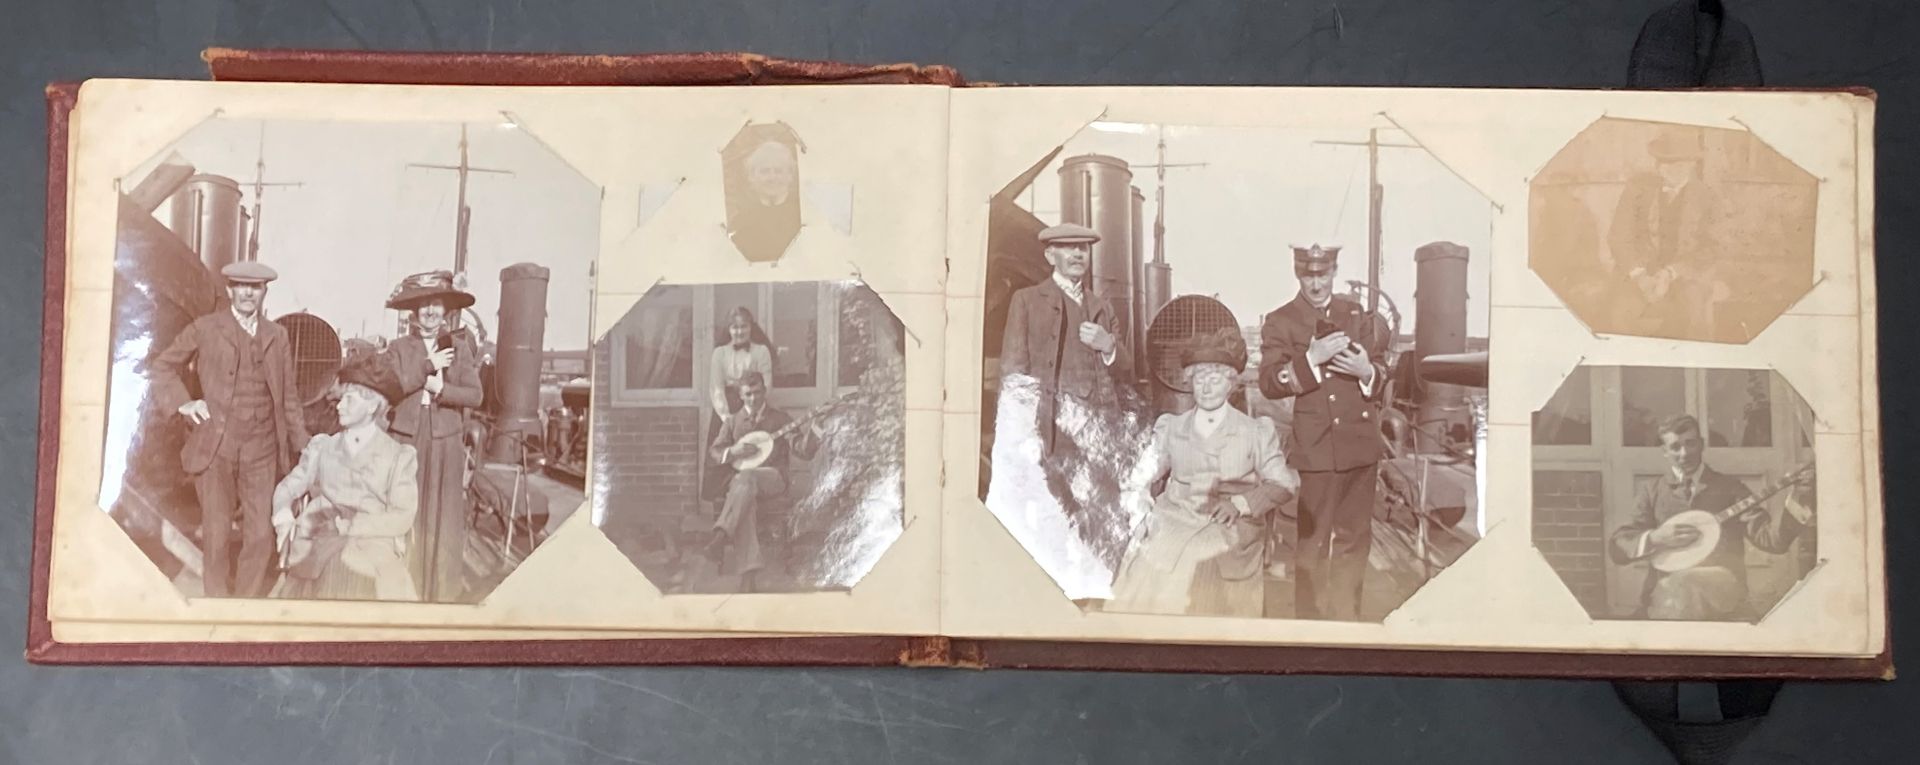 Photograph album relating to Captain Henry Maclean Fothergill who served in the Boxer Rebellion - Image 5 of 10